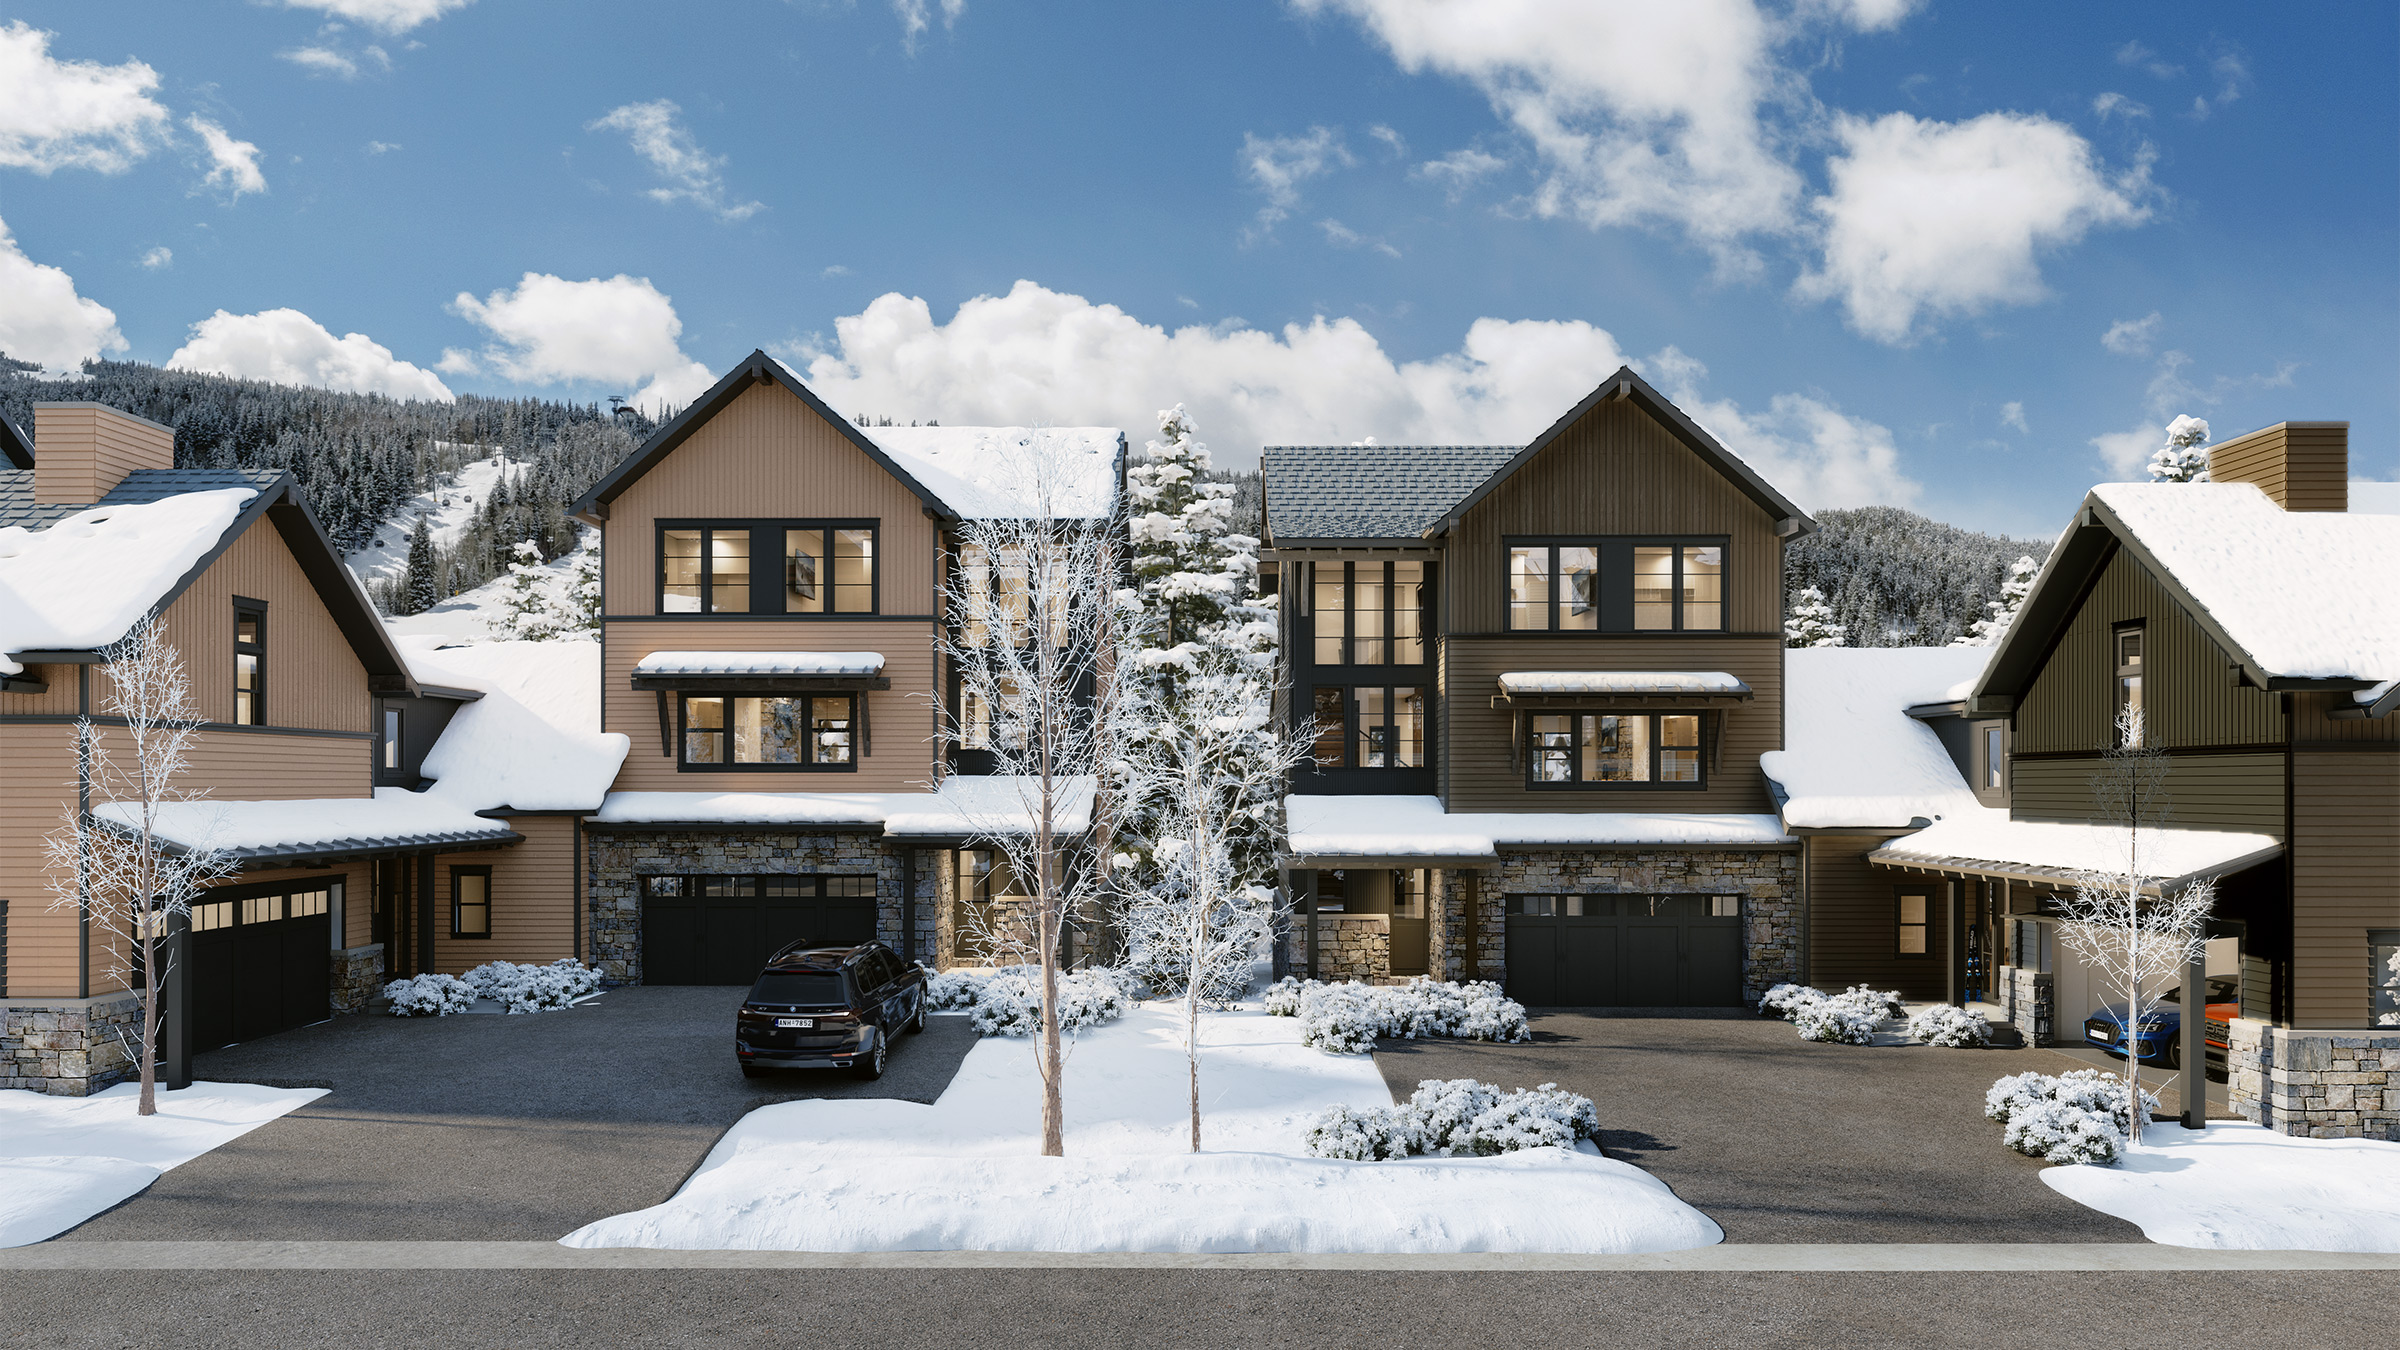 Residences feature modern mountain architecture, two-car garages, and private driveways.